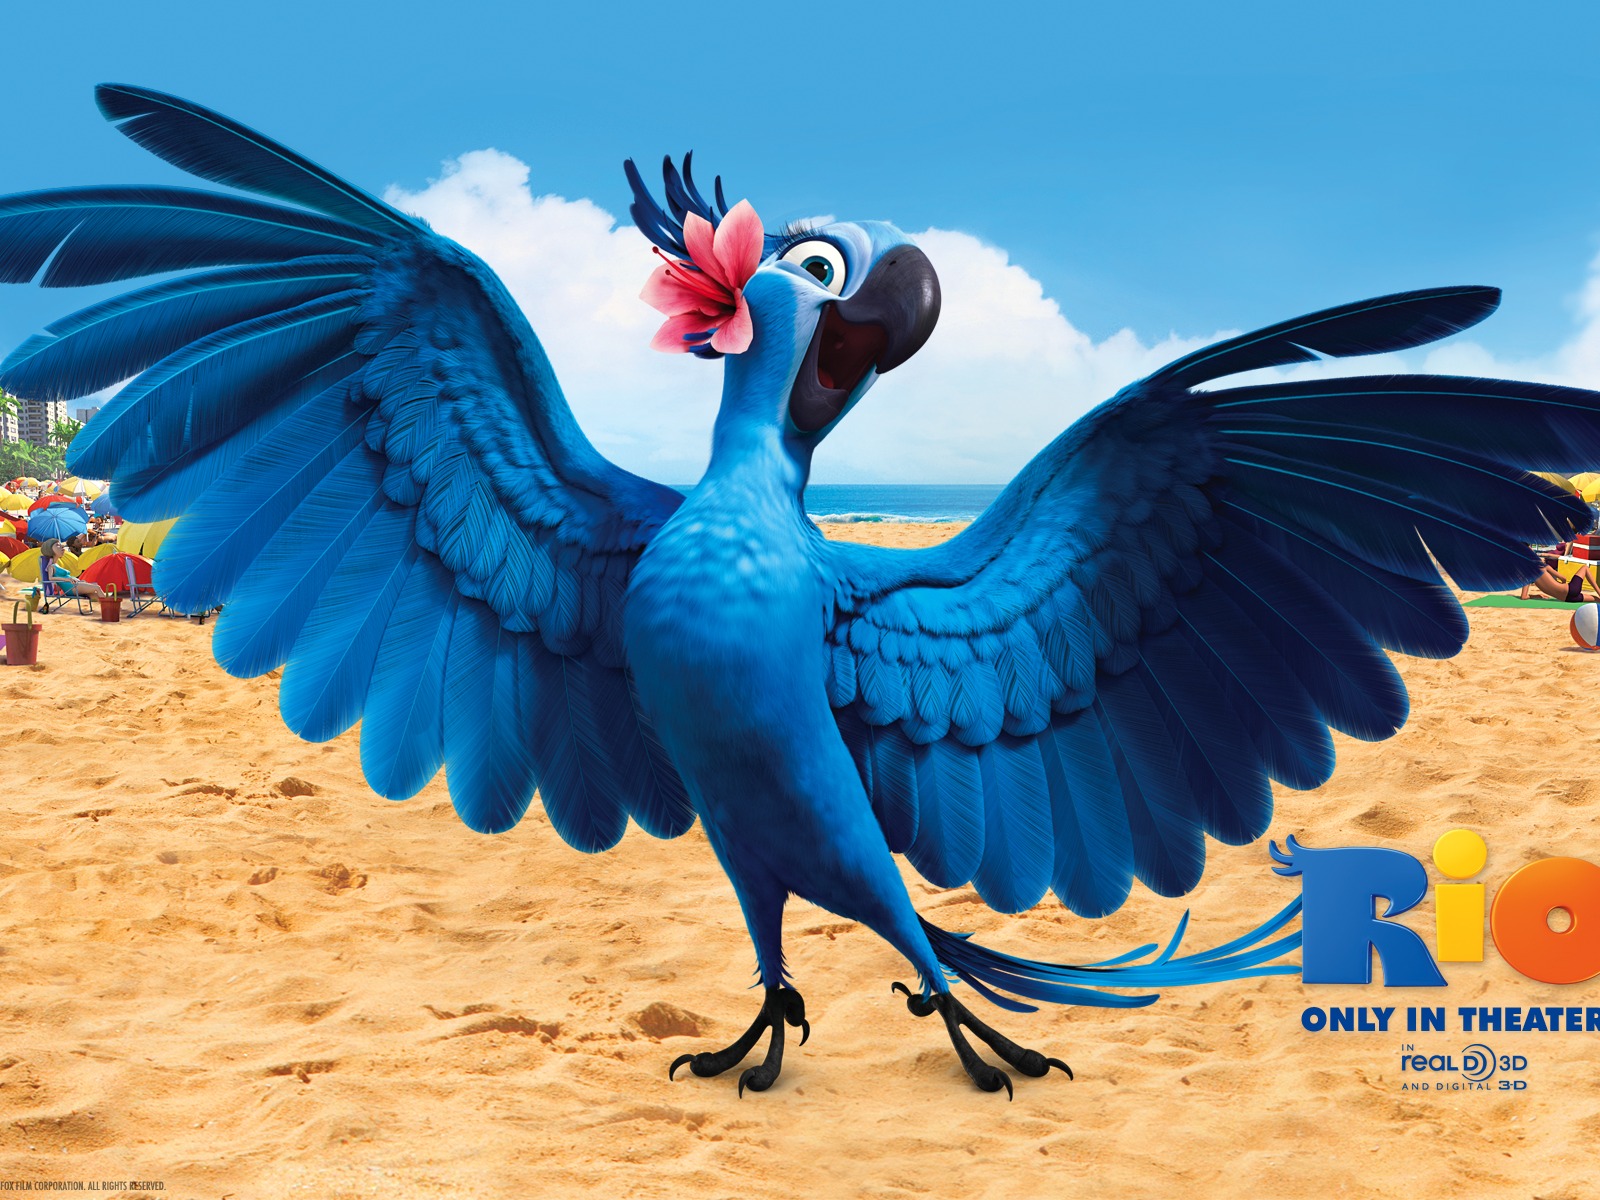 Rio 2011 wallpapers #1 - 1600x1200